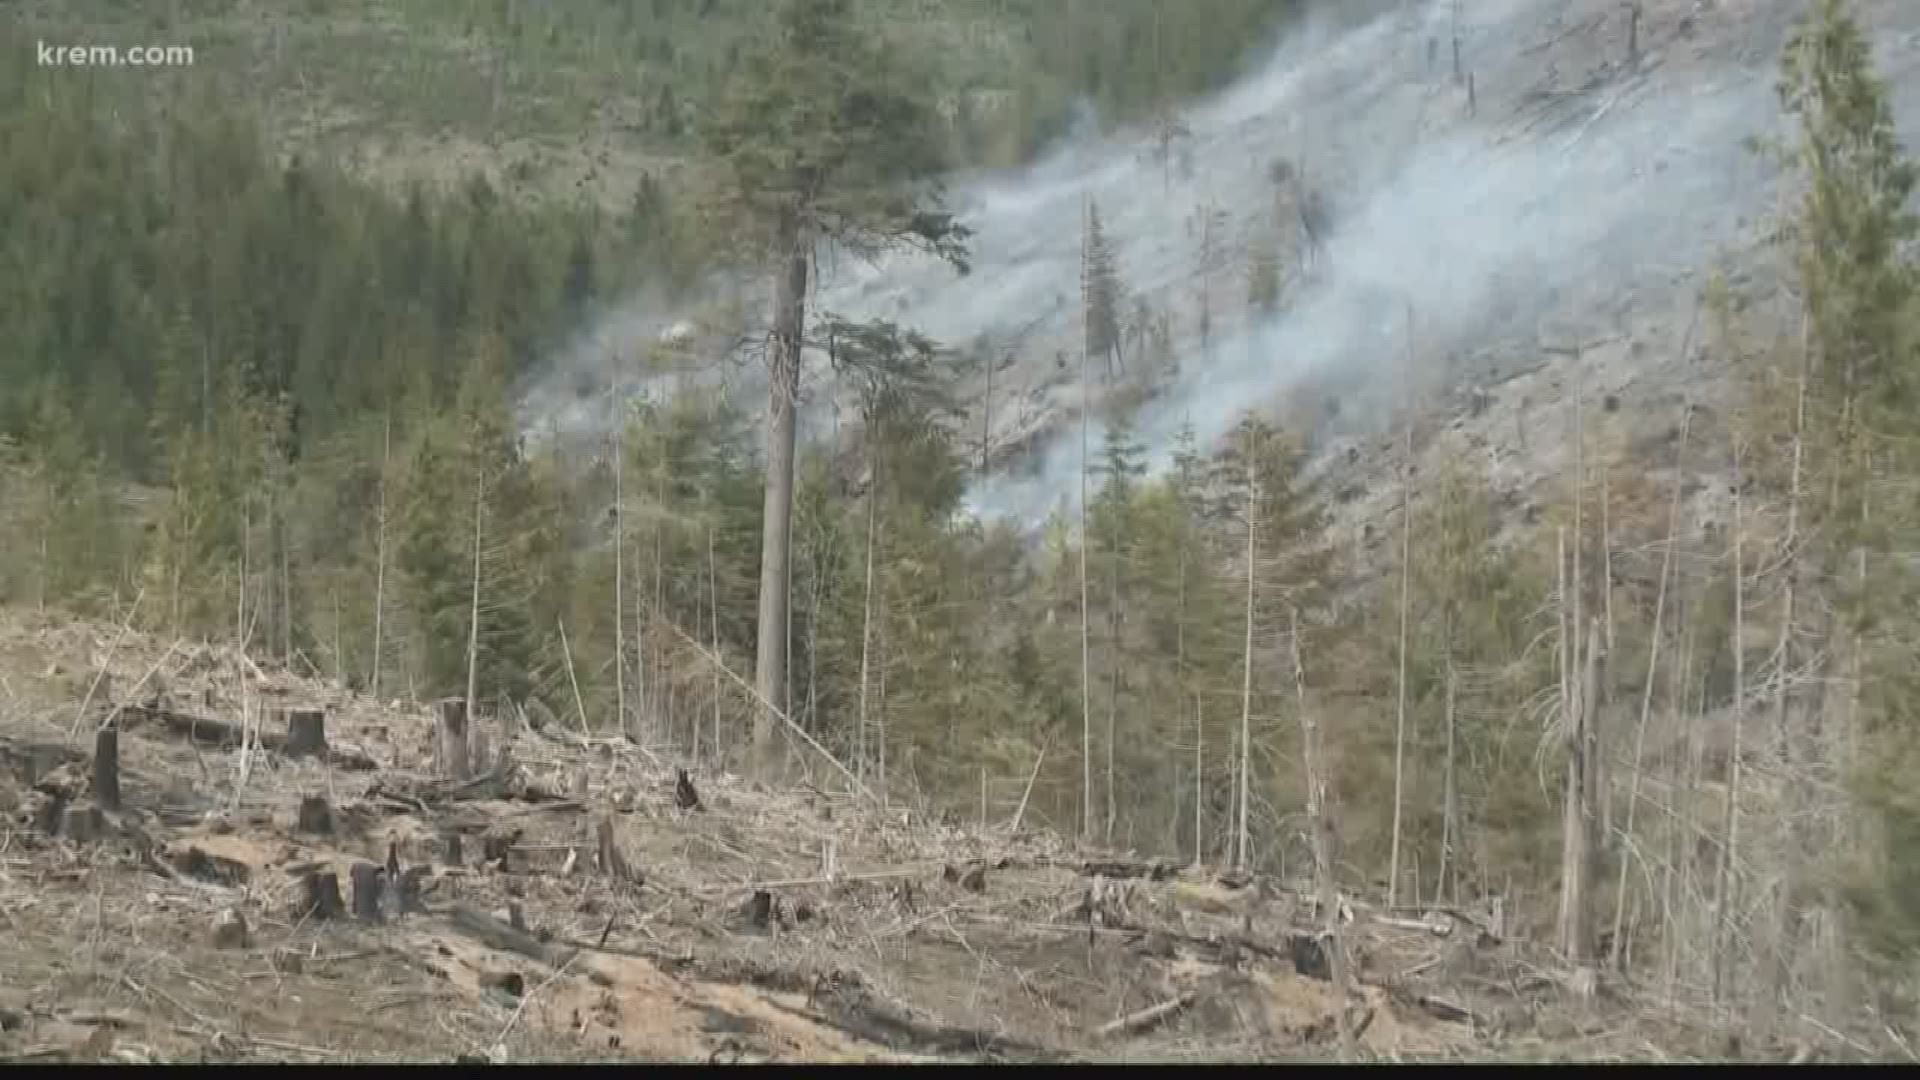 KREM Reporter Taylor Viydo went down to Latah County as the Prospect Fire burns more than 370 acres of land/